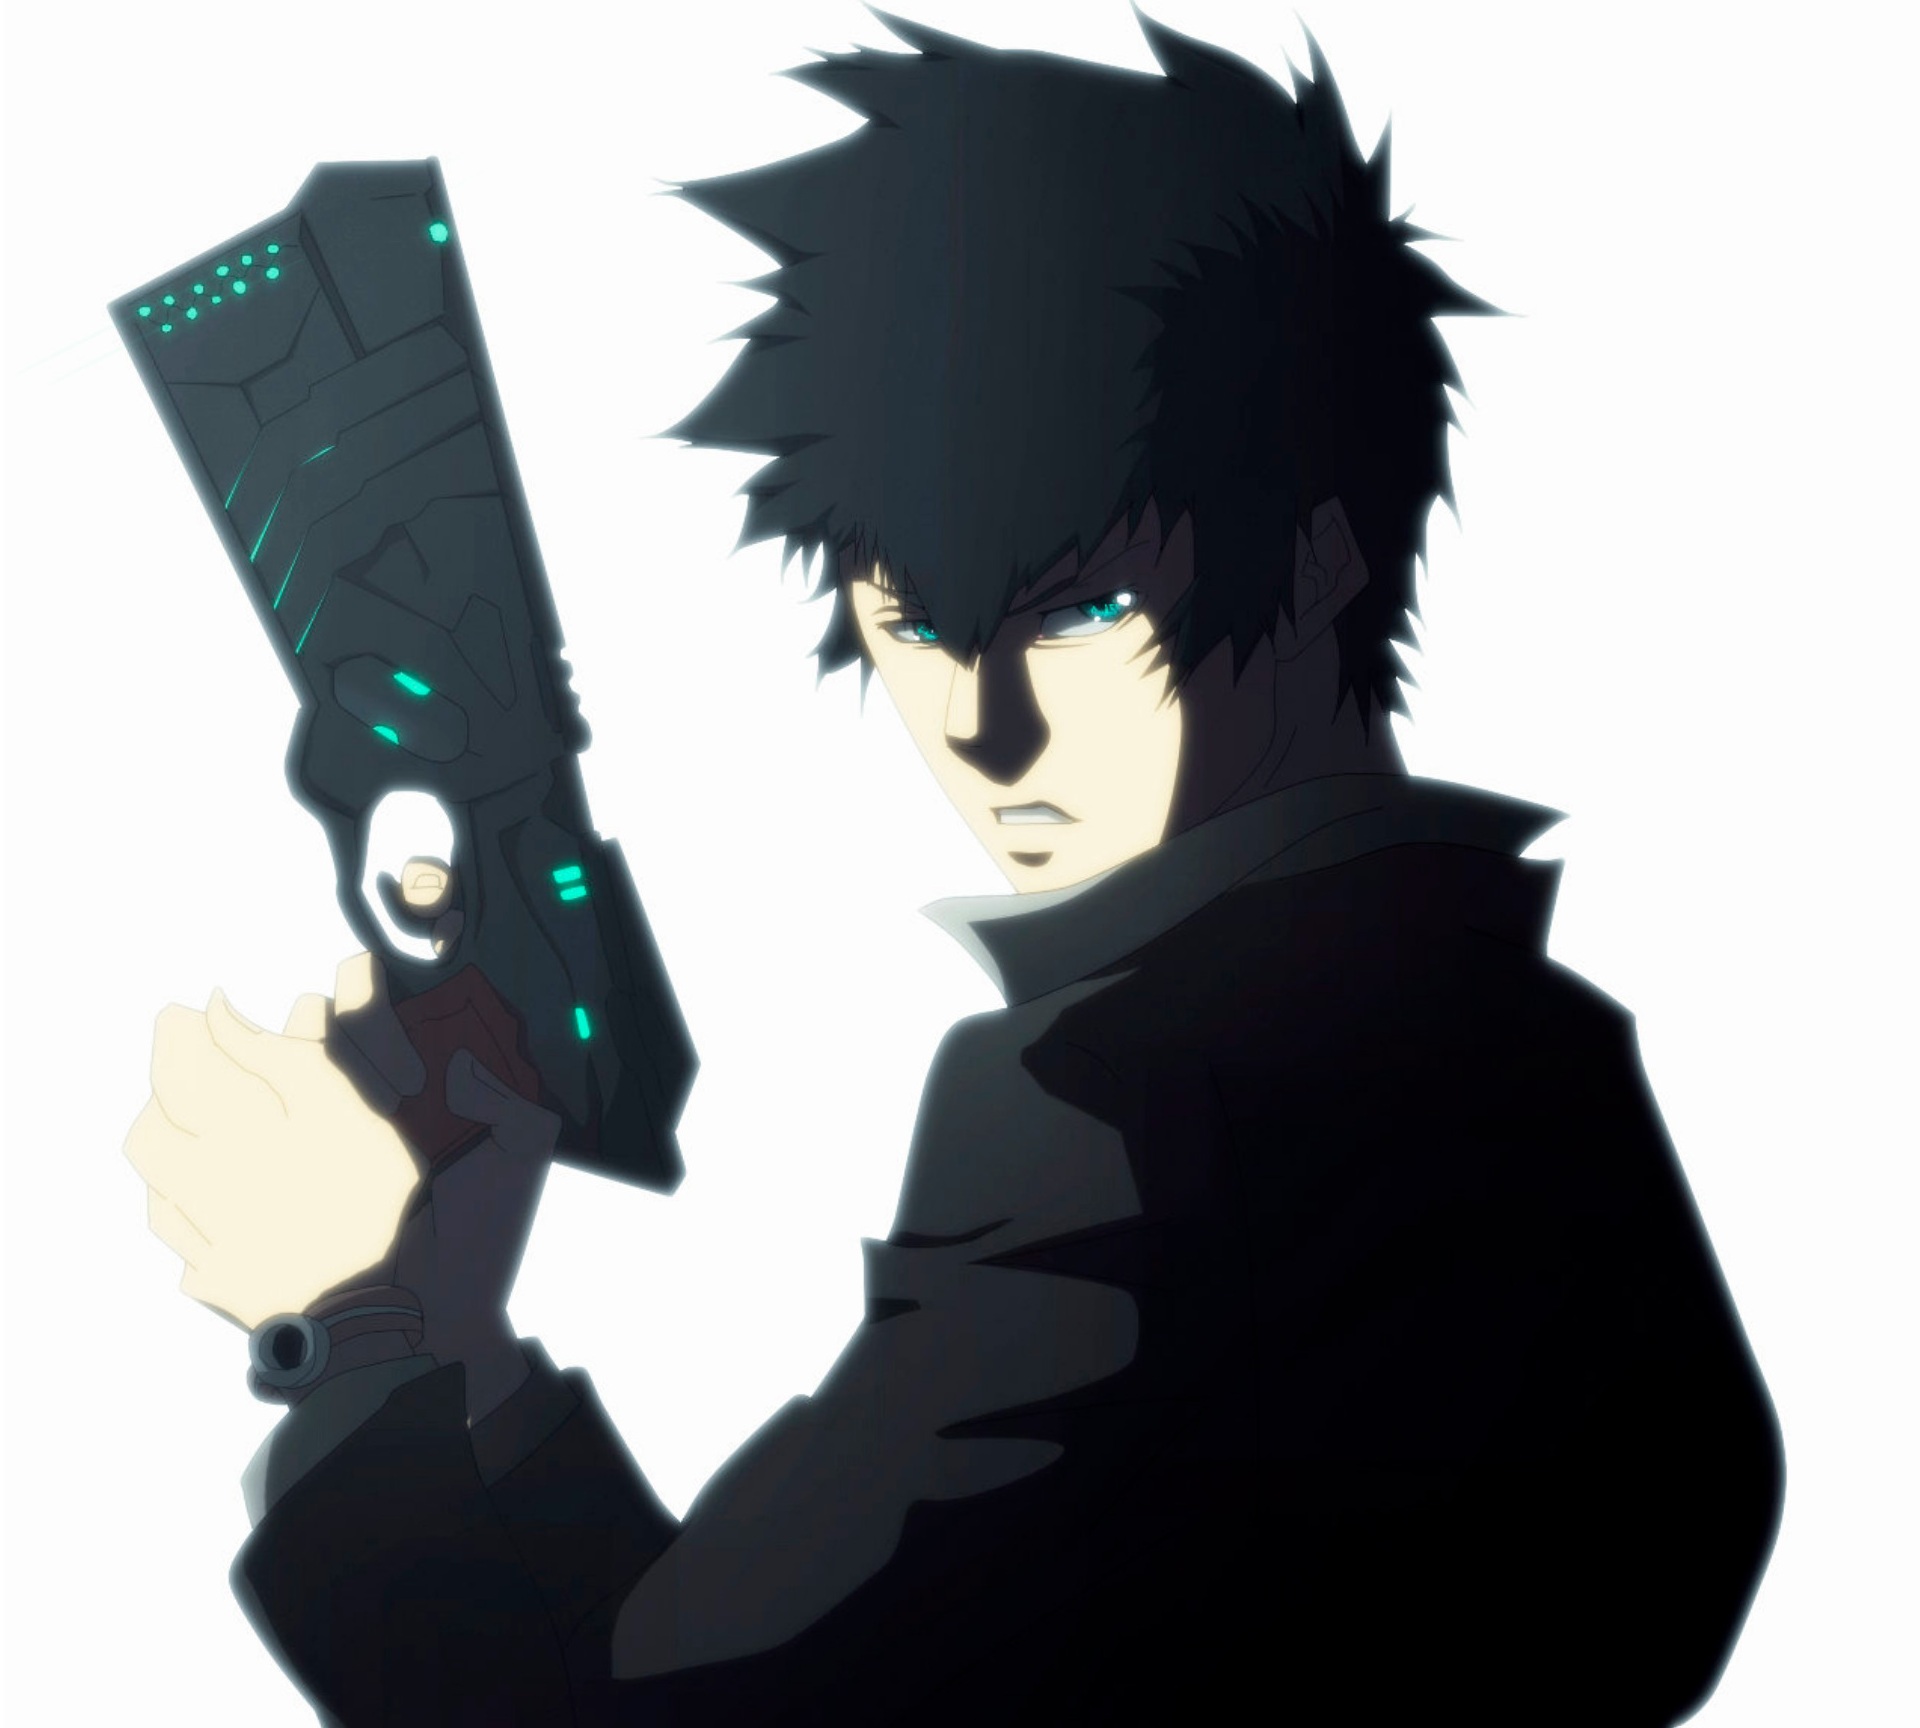 kougami with his dominator by Bvinci